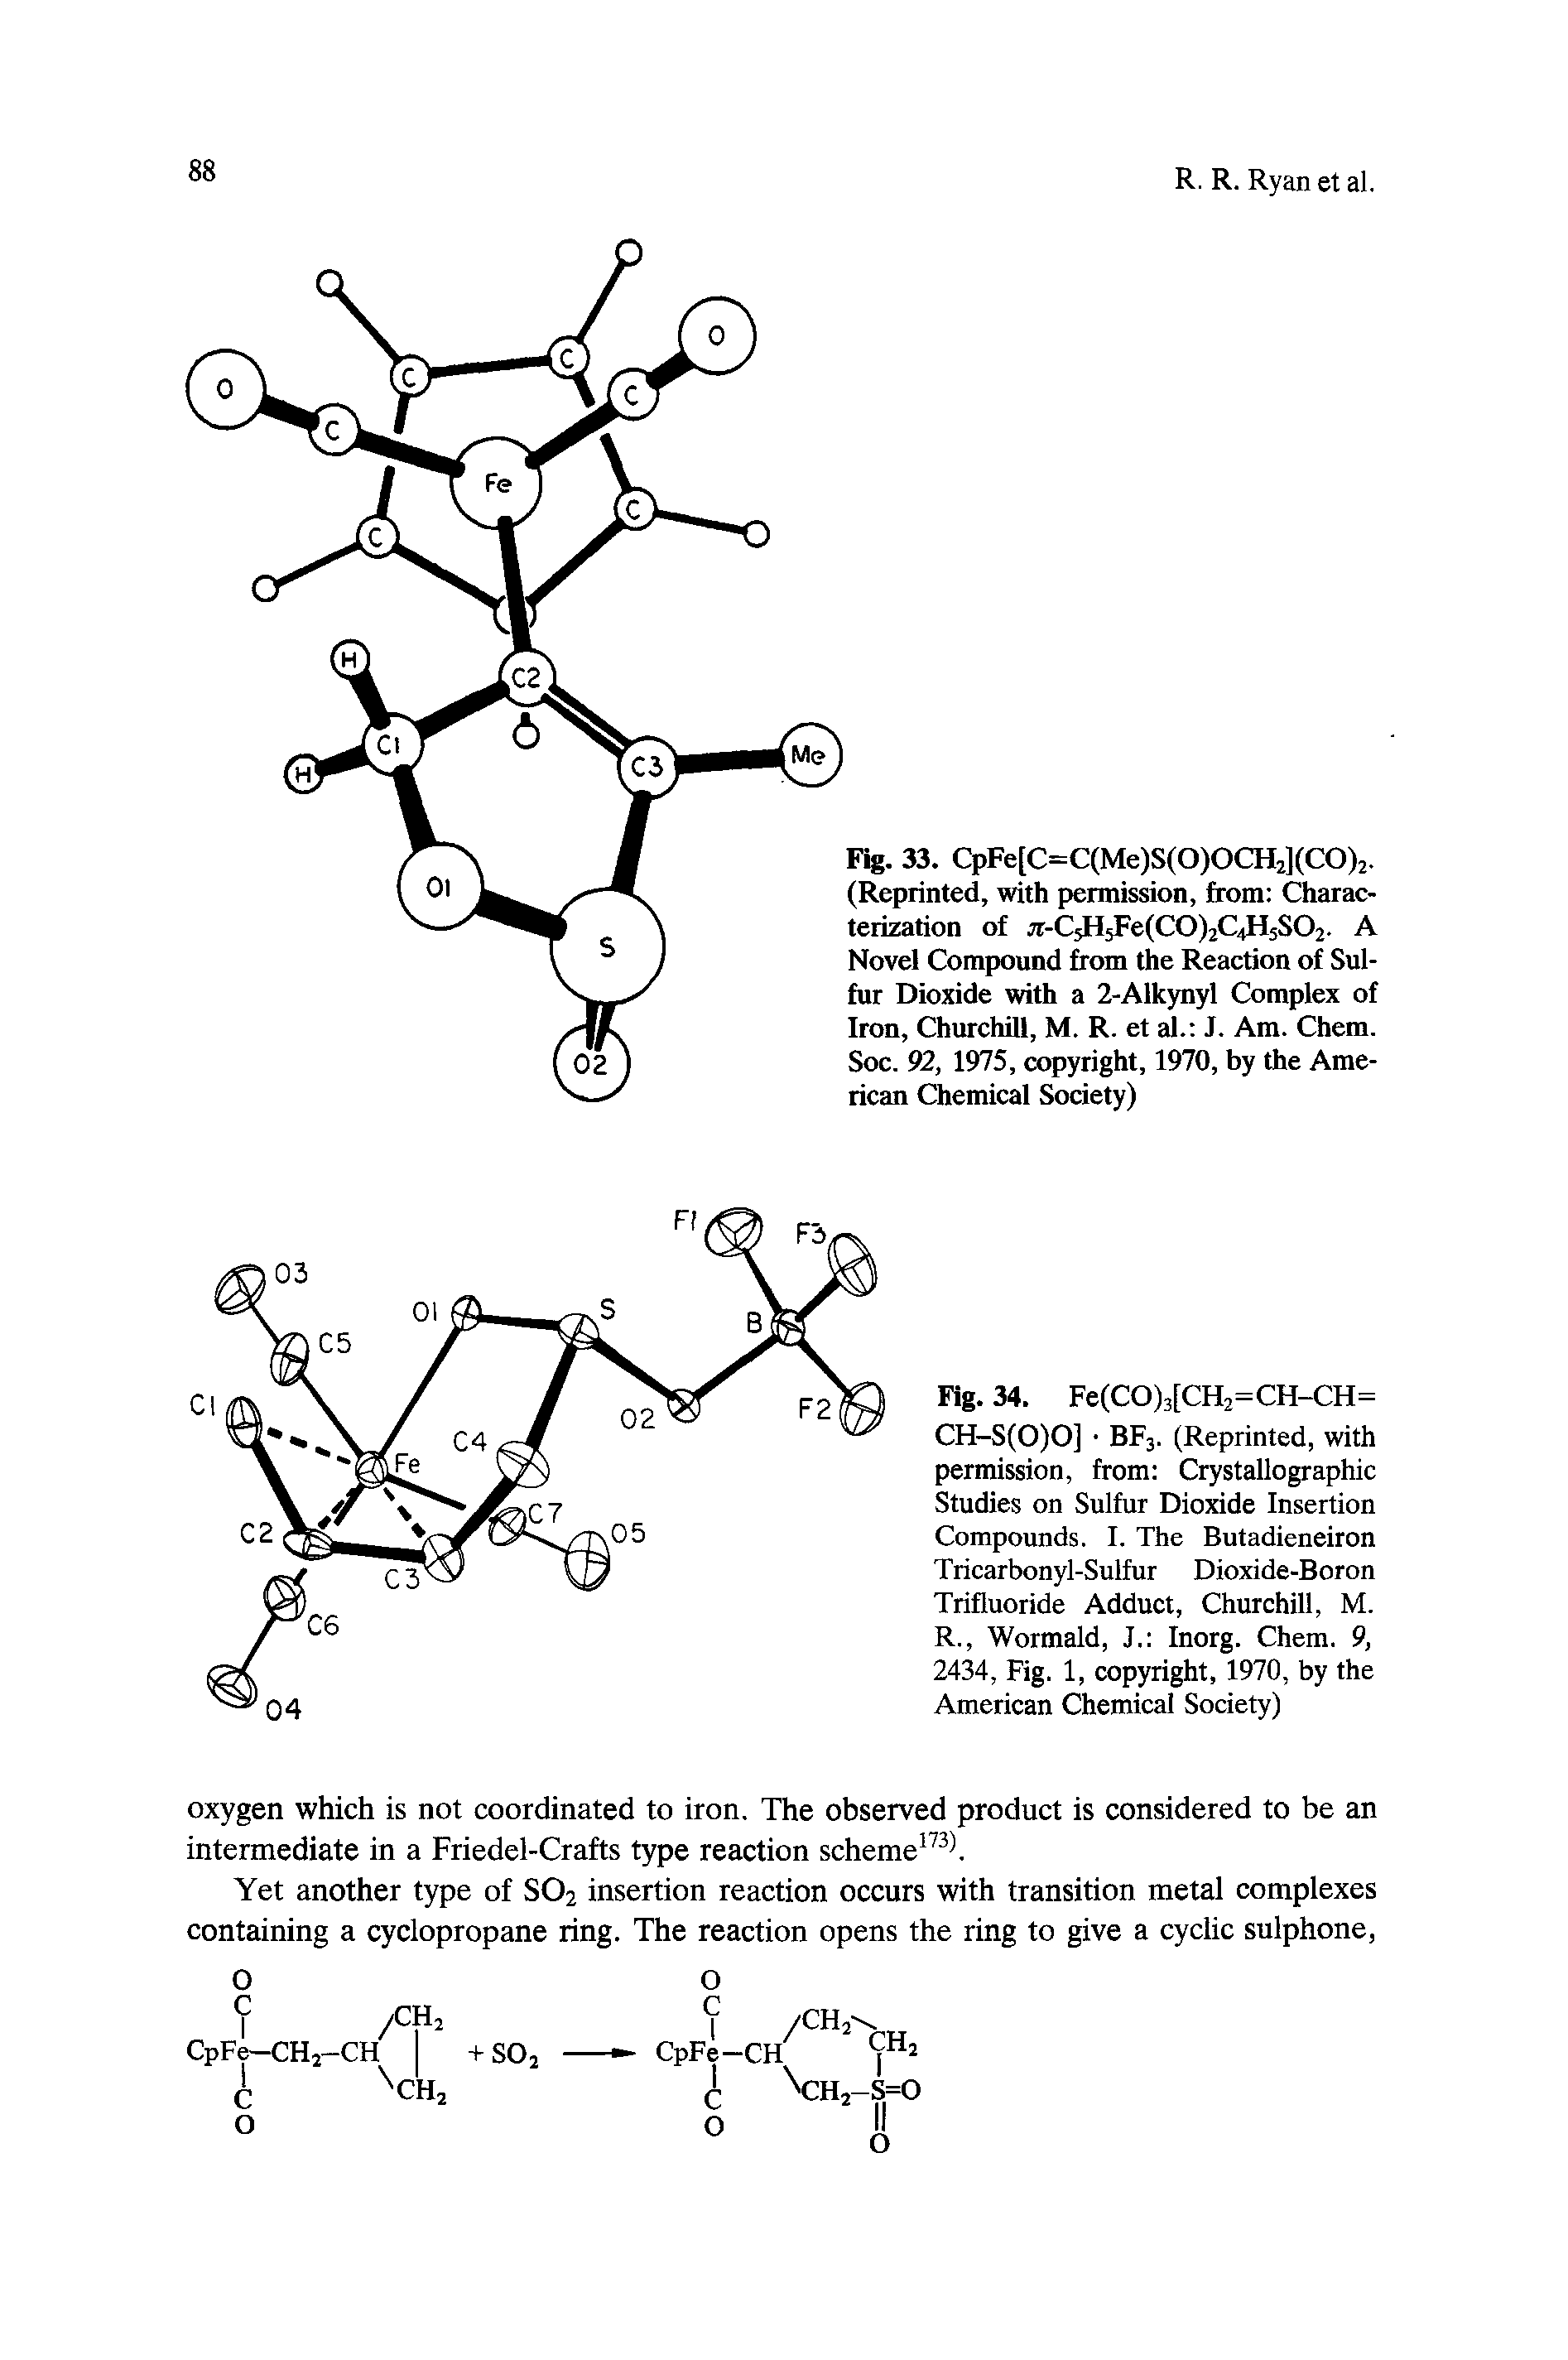 Fig. 34. Fe(CO)3[CH2=CH-CH= CH-S(0)0] BF3. (Reprinted, with permission, from Crystallographic Studies on Sulfur Dioxide Insertion Compounds. I. The Butadieneiron Tricarbonyl-Sulfur Dioxide-Boron Trifluoride Adduct, Churchill, M. R., Wormald, J. Inorg. Chem. 9, 2434, Fig. 1, copyright, 1970, by the American Chemical Society)...